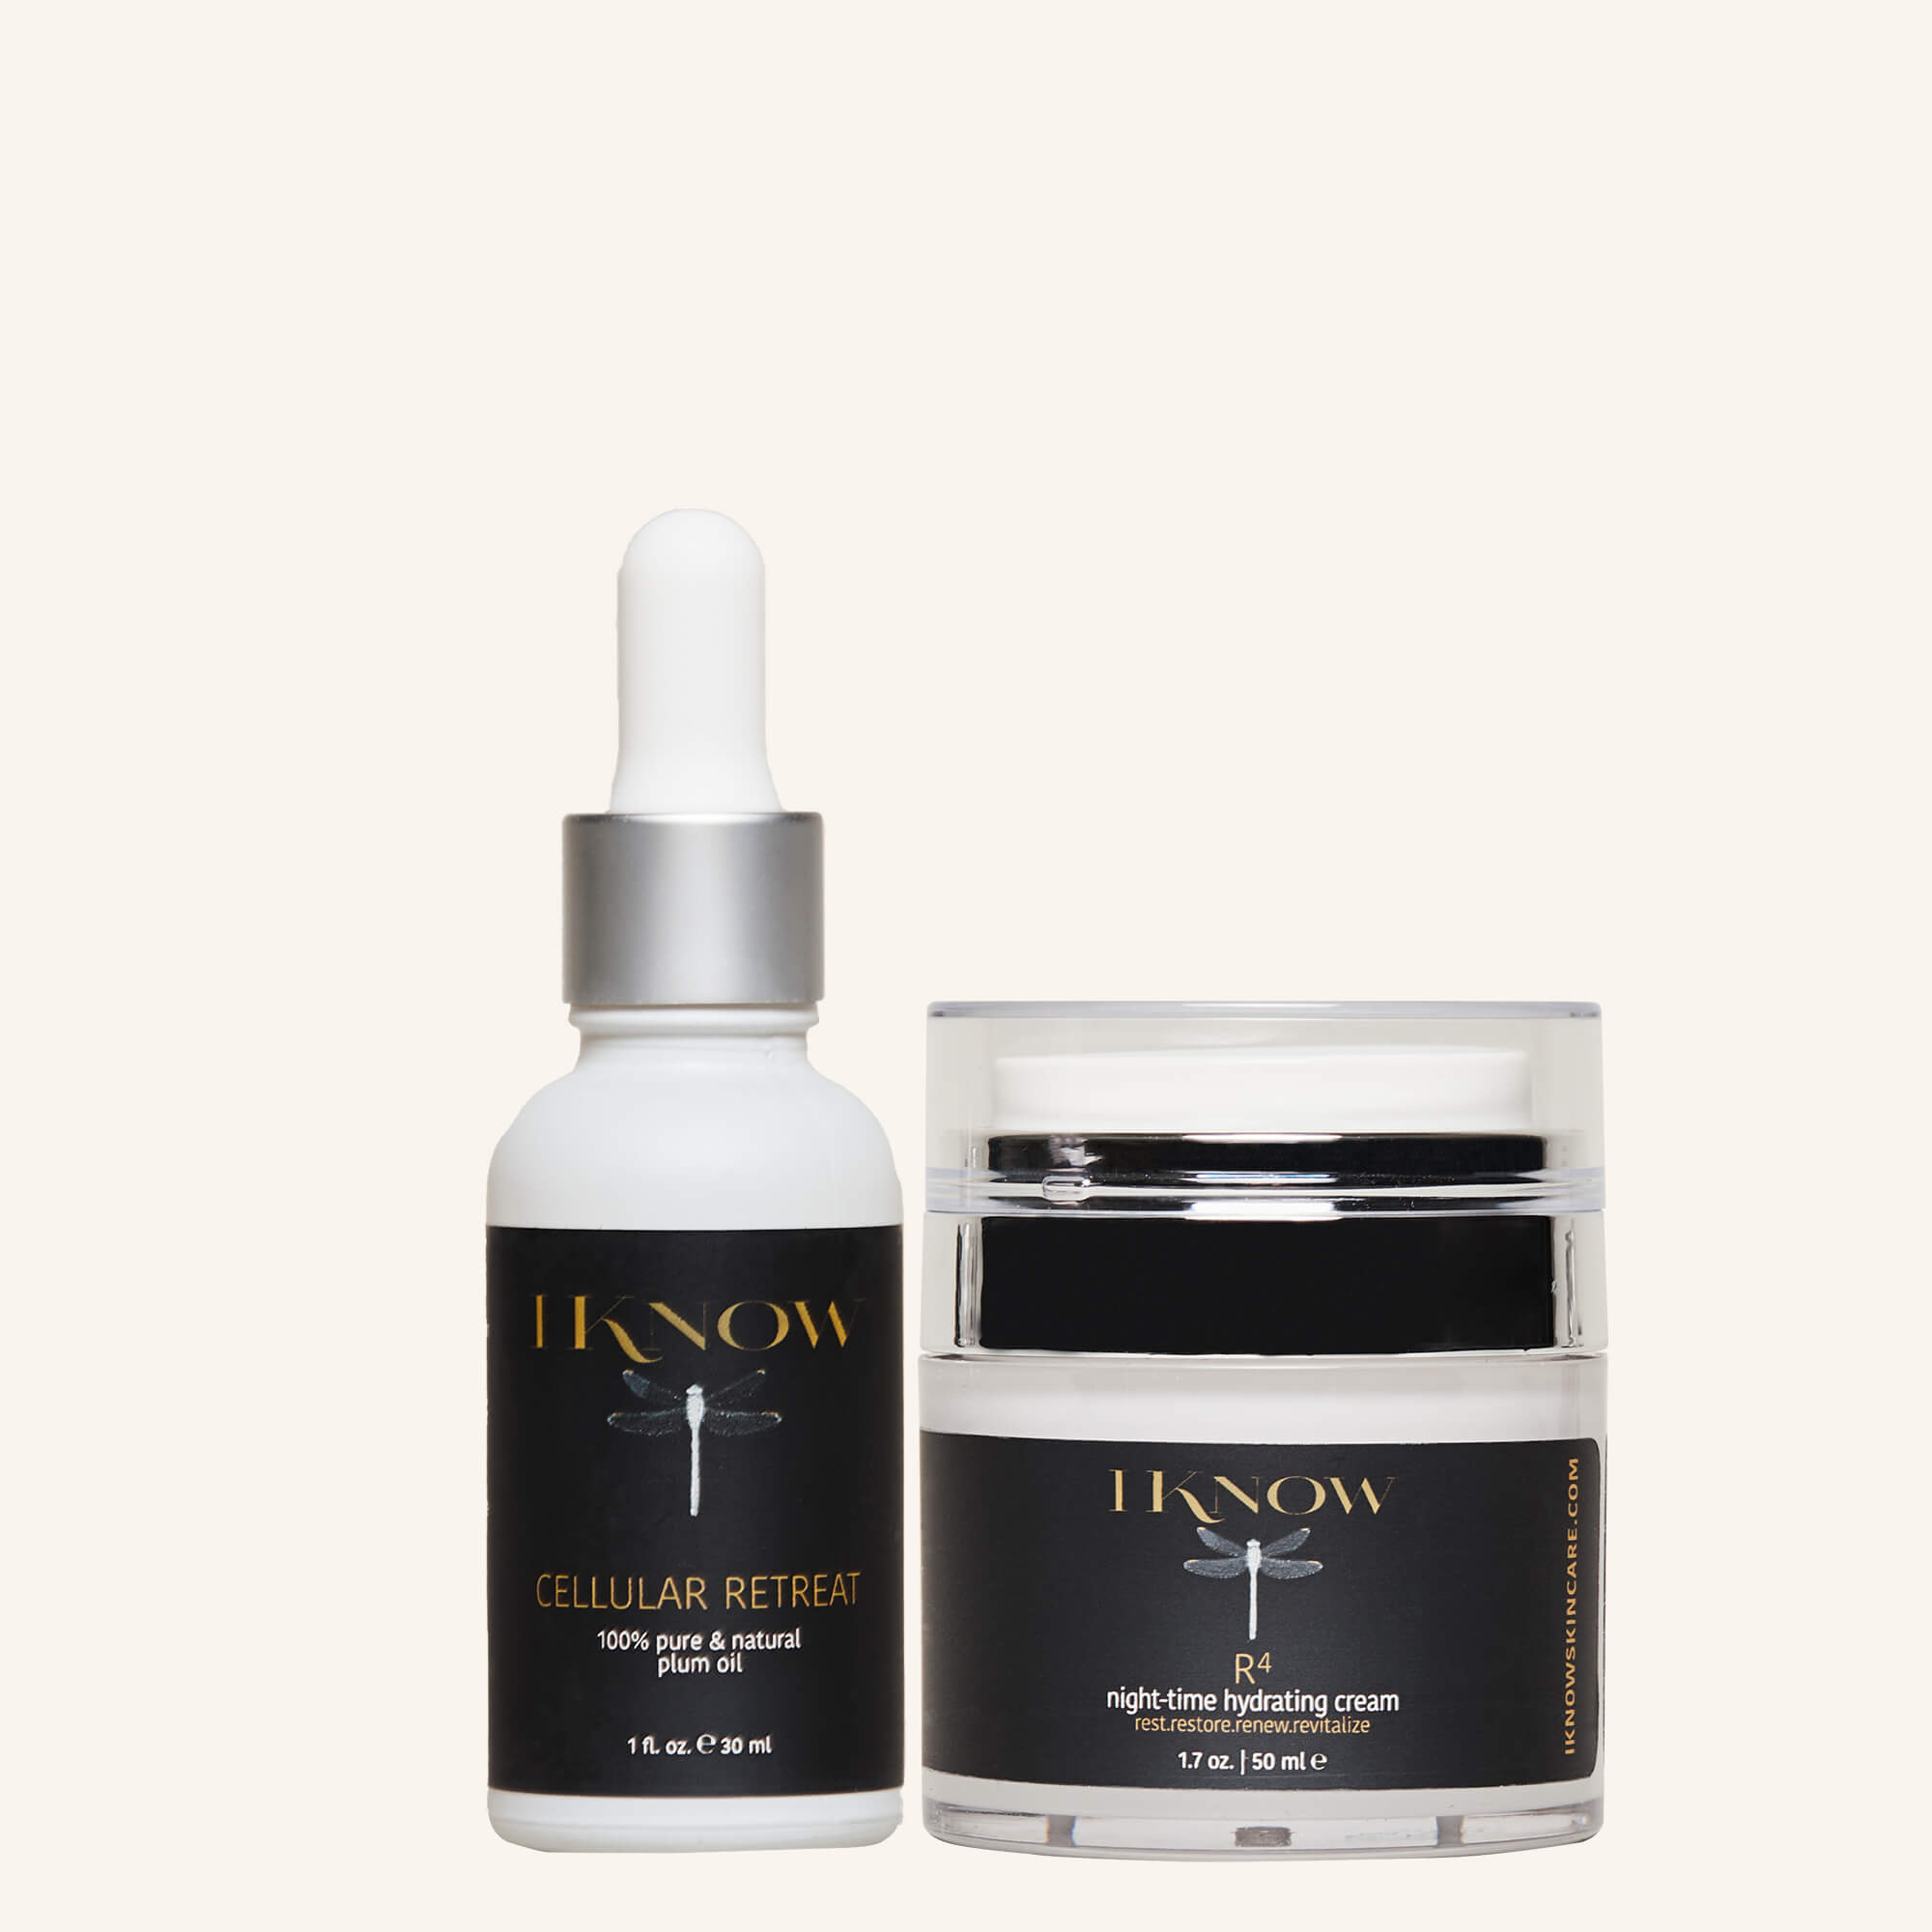 IKNOW Skincare Hydration Duo with 100% Pure Kakadu Plum Oil and Hydrating Nighttime Cream class=